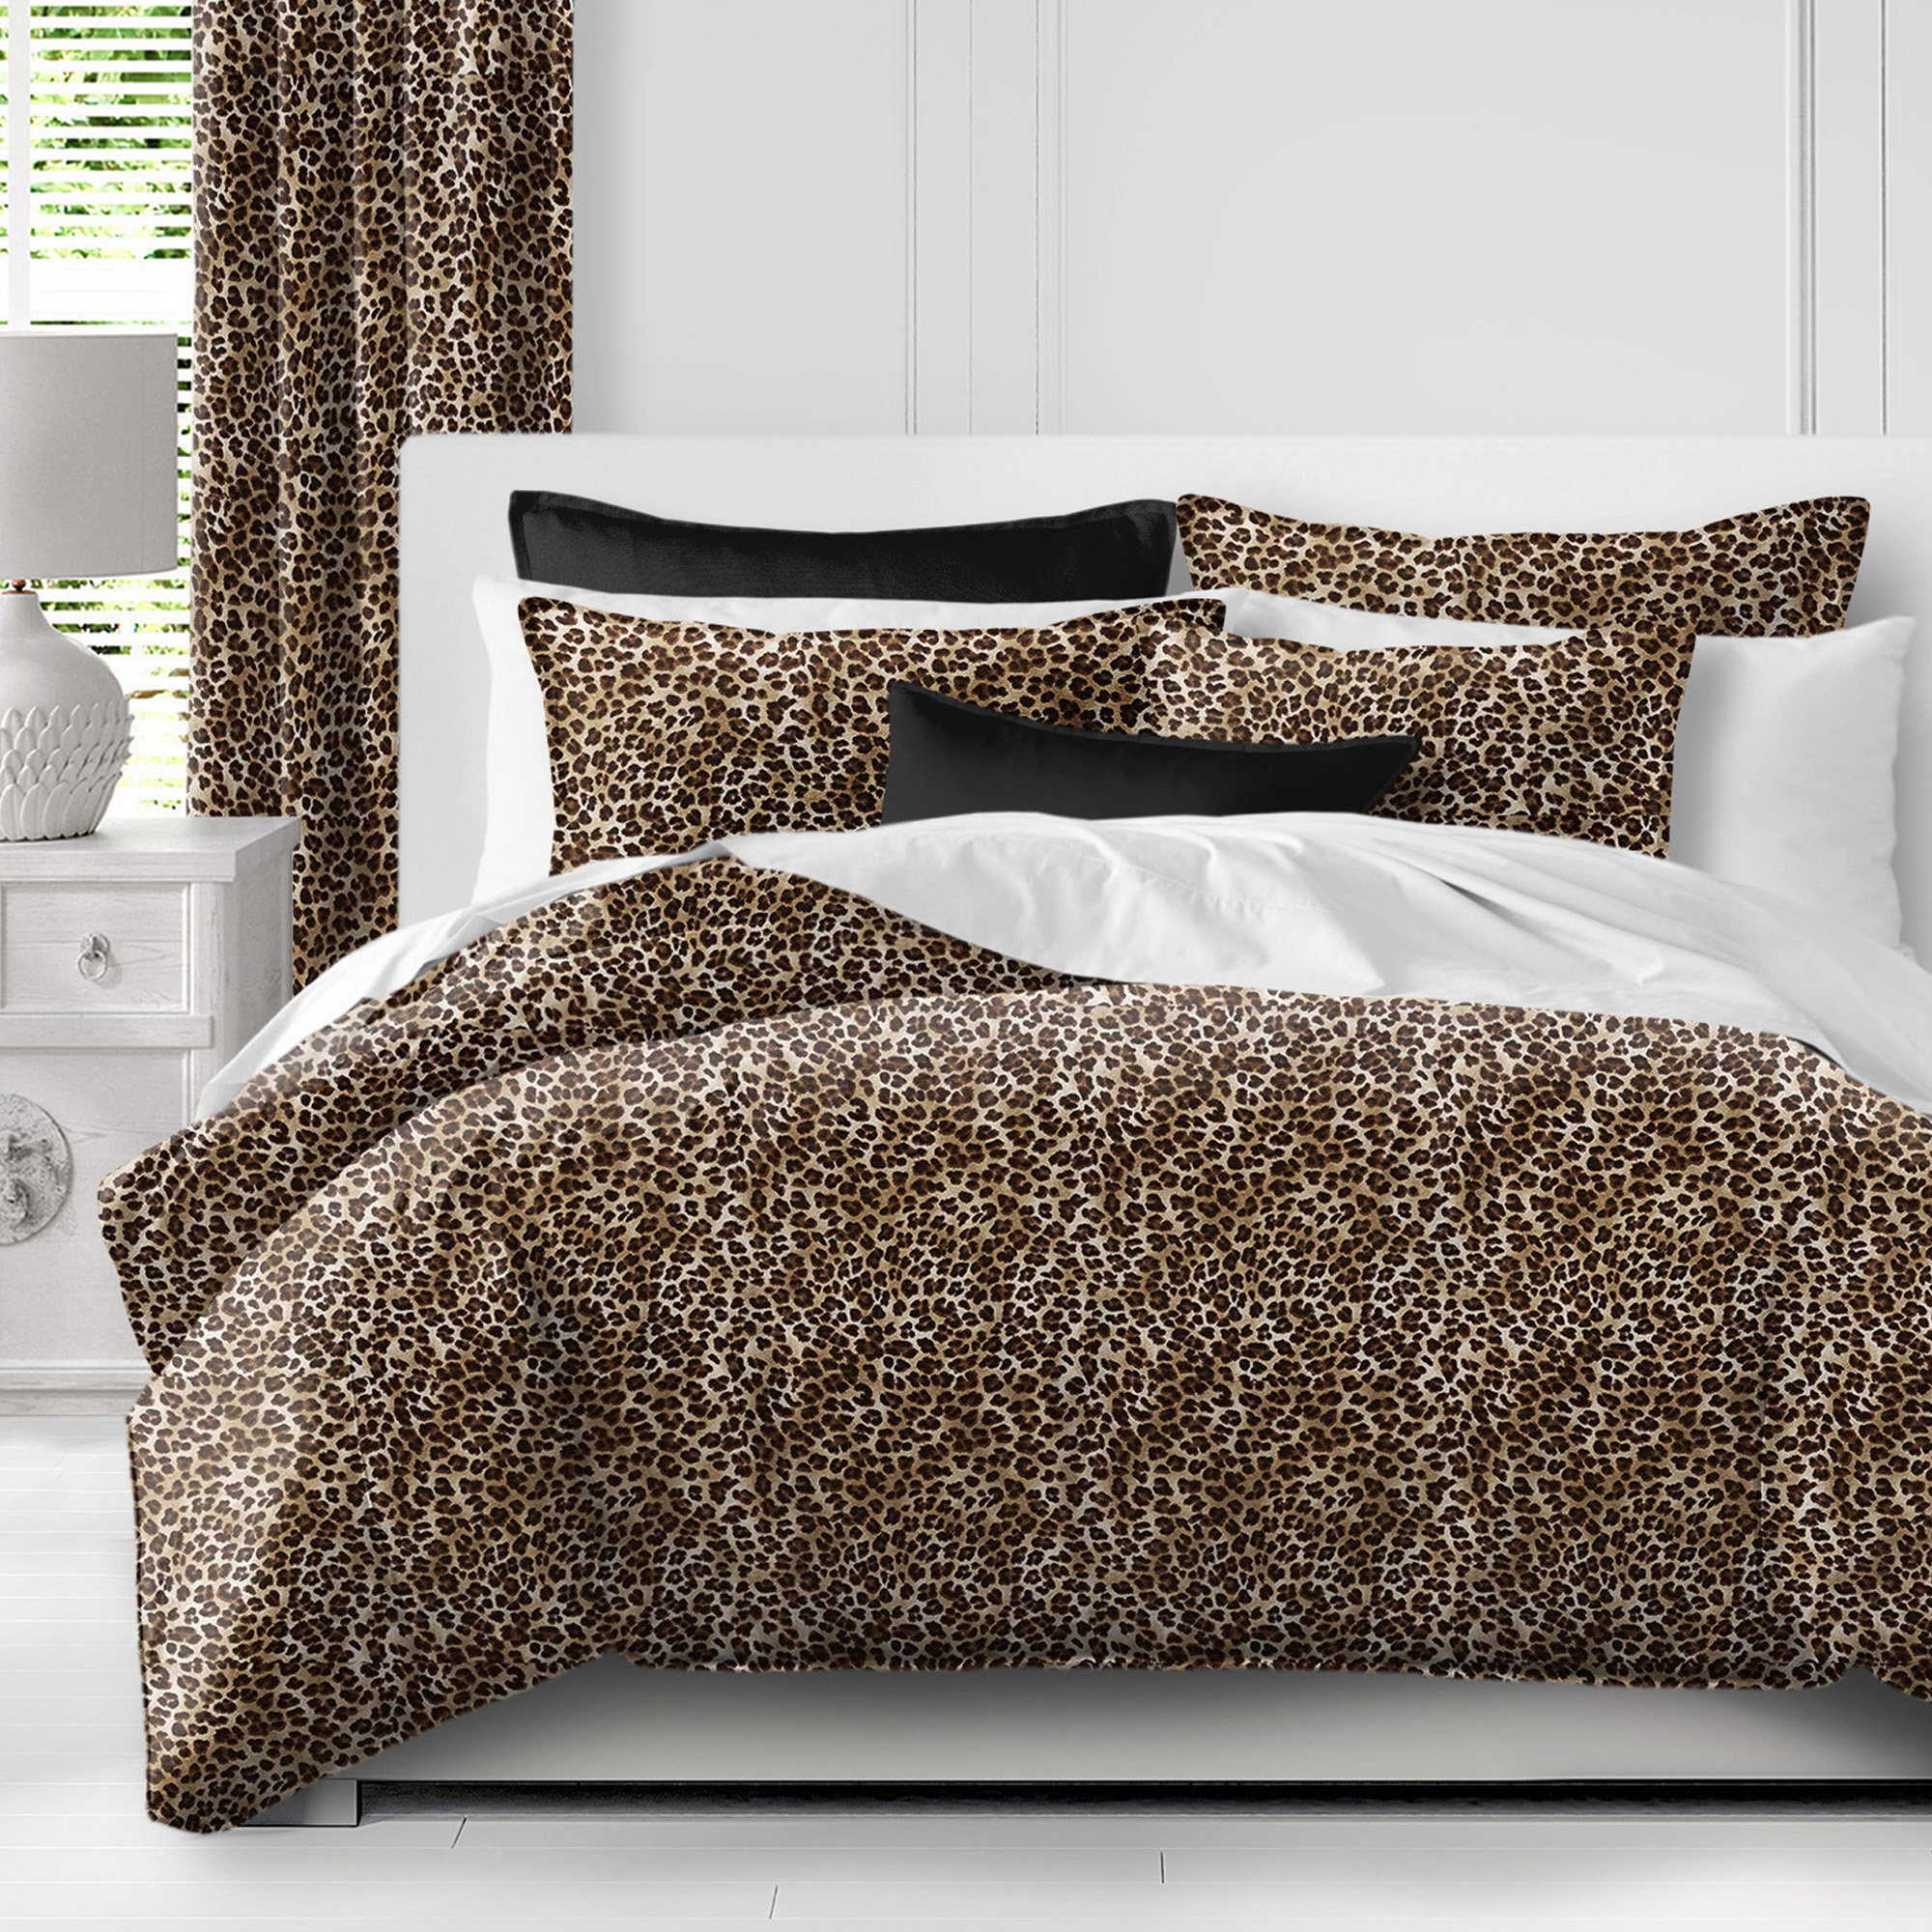 The Tailor's Bed Madison 100% Cotton Coverlet Set | Wayfair